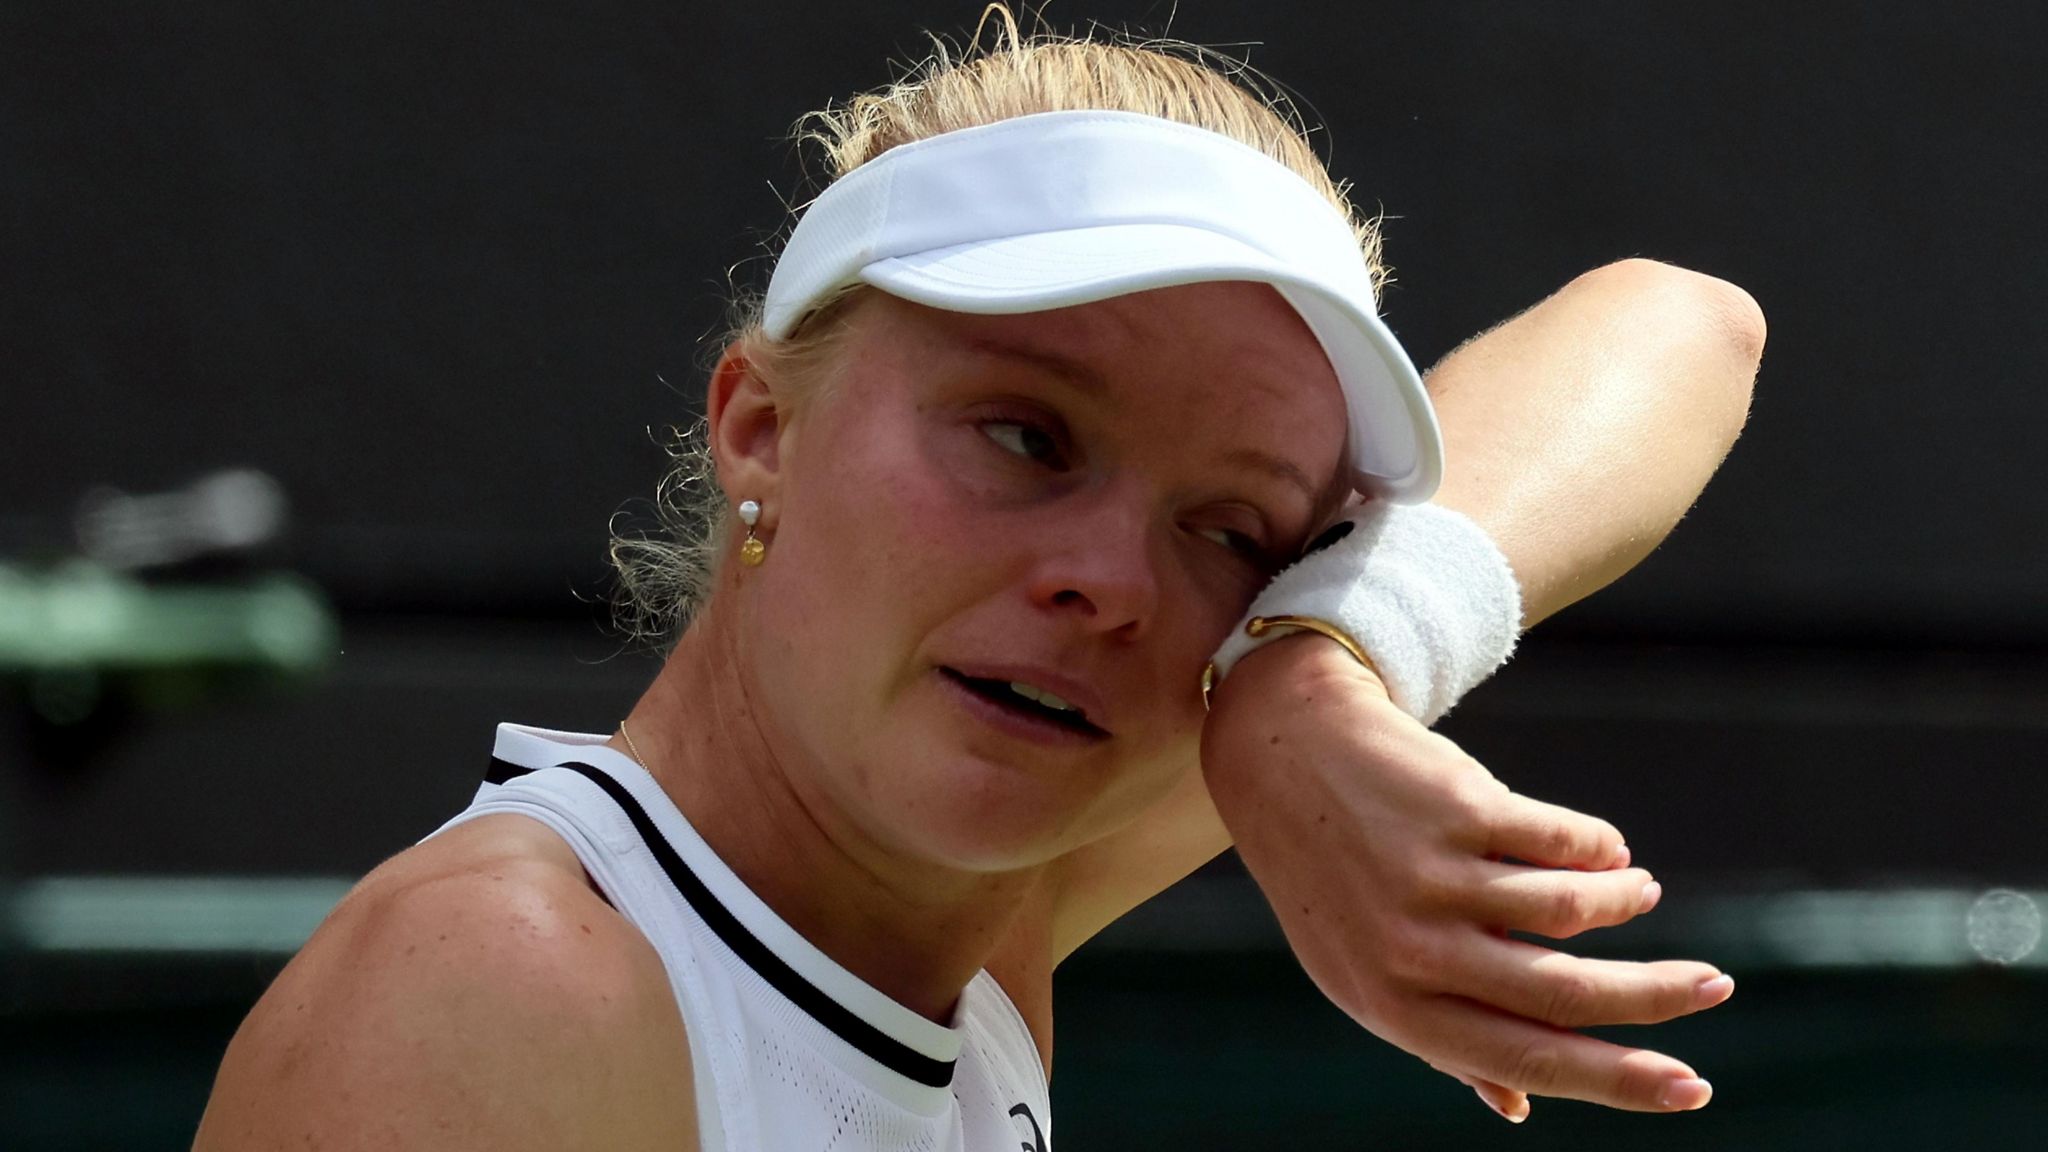 Harriet Dart wipes away tears with her sweatband during her Wimbledon second-round match against Katie Boulter